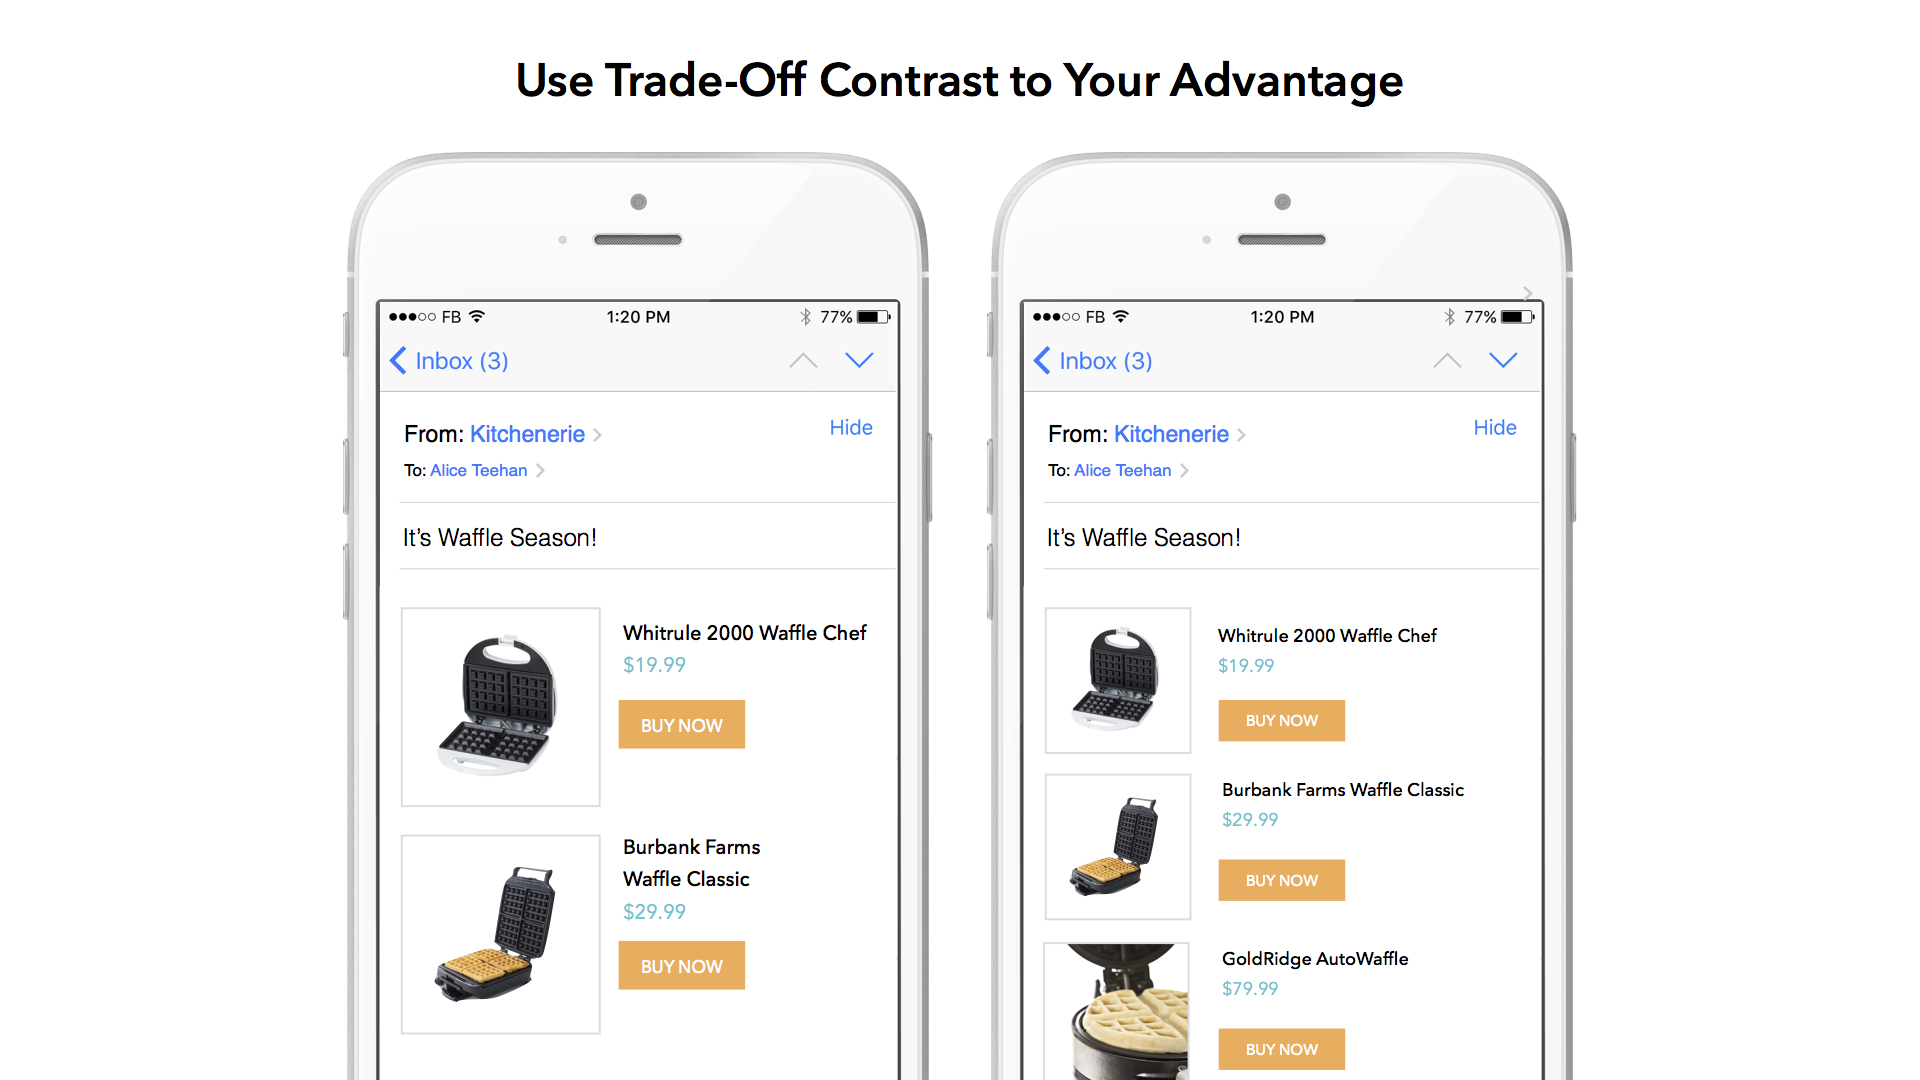 Use Trade-Off Contrast to Your Advantage